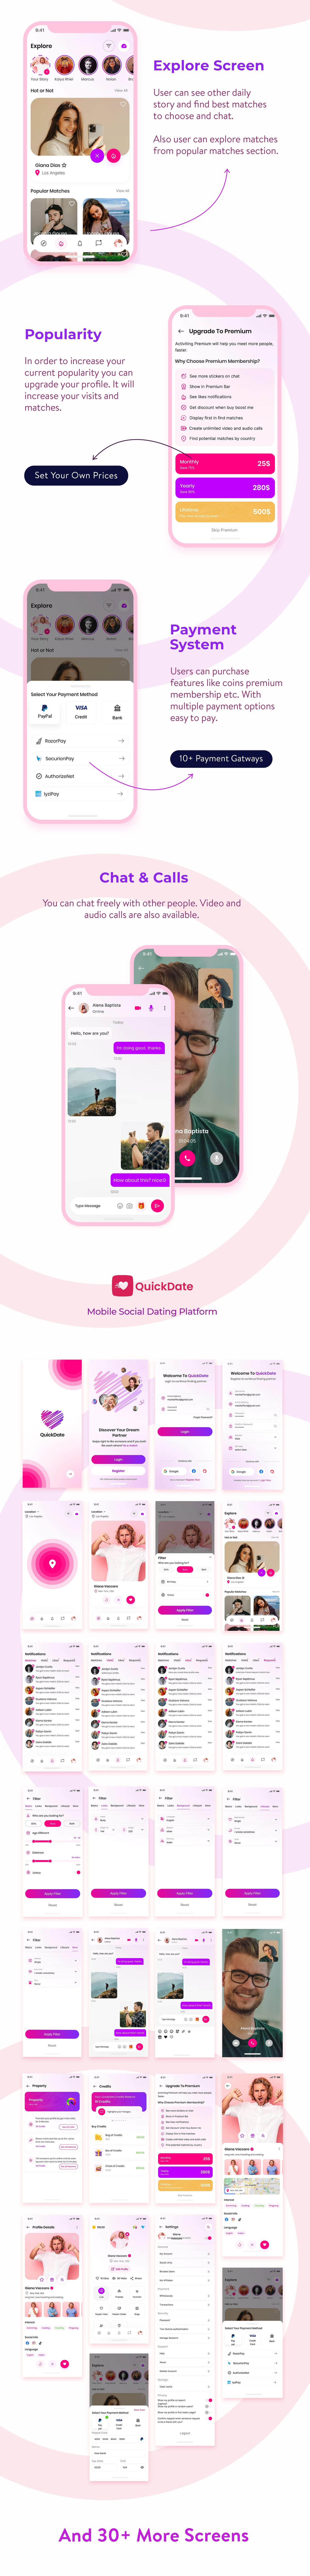 QuickDate Android - Mobile Social Dating Platform Application - 5